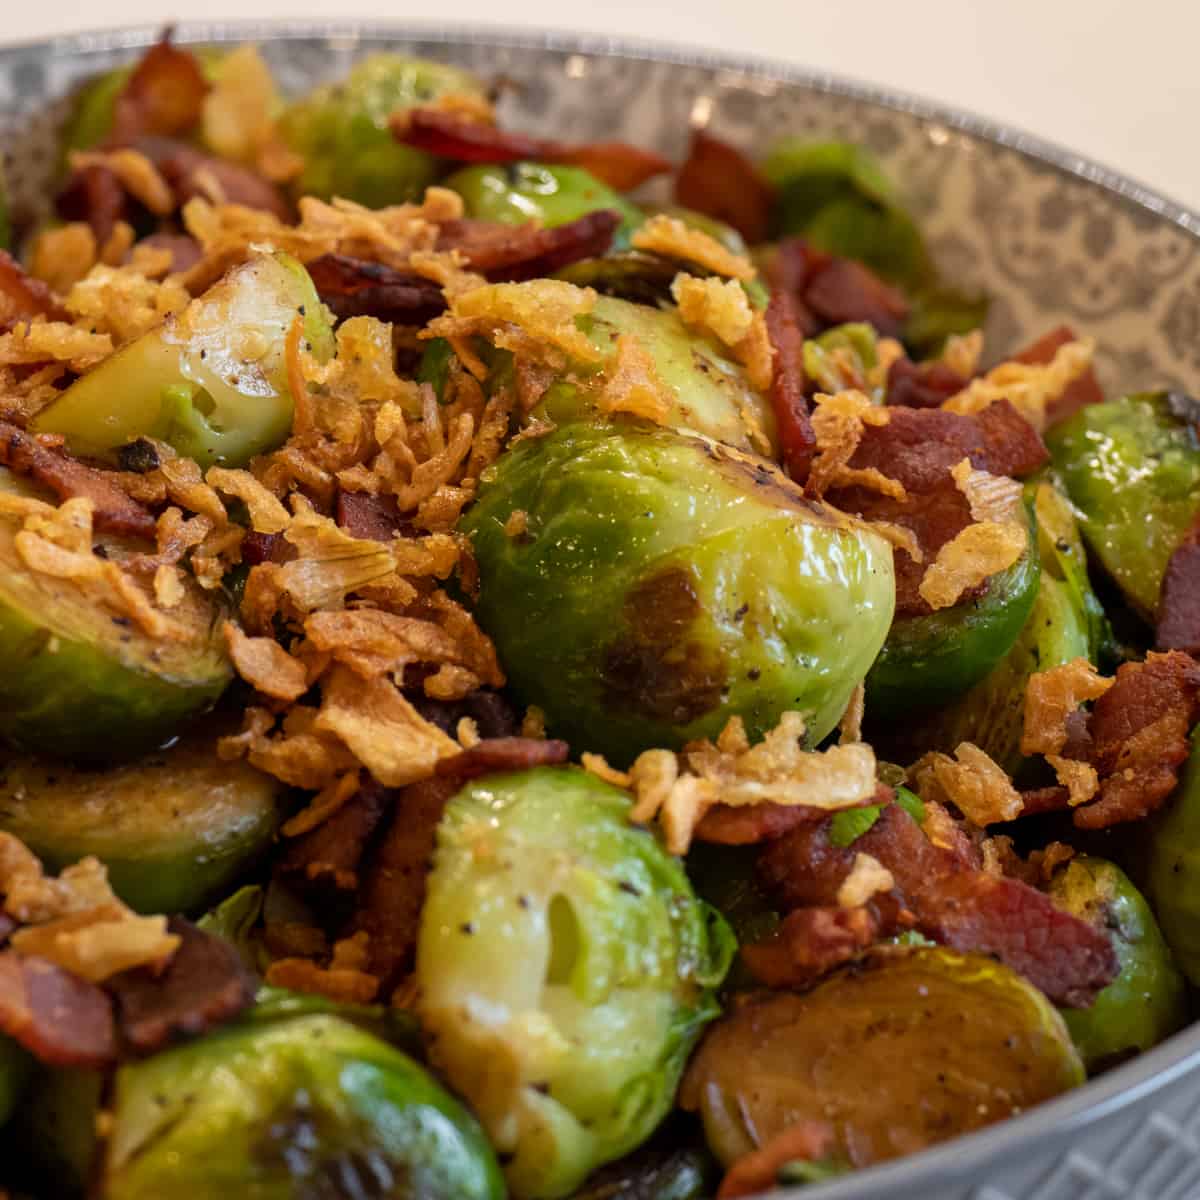 A close up picture of fried Brussel's sprouts with bacon.